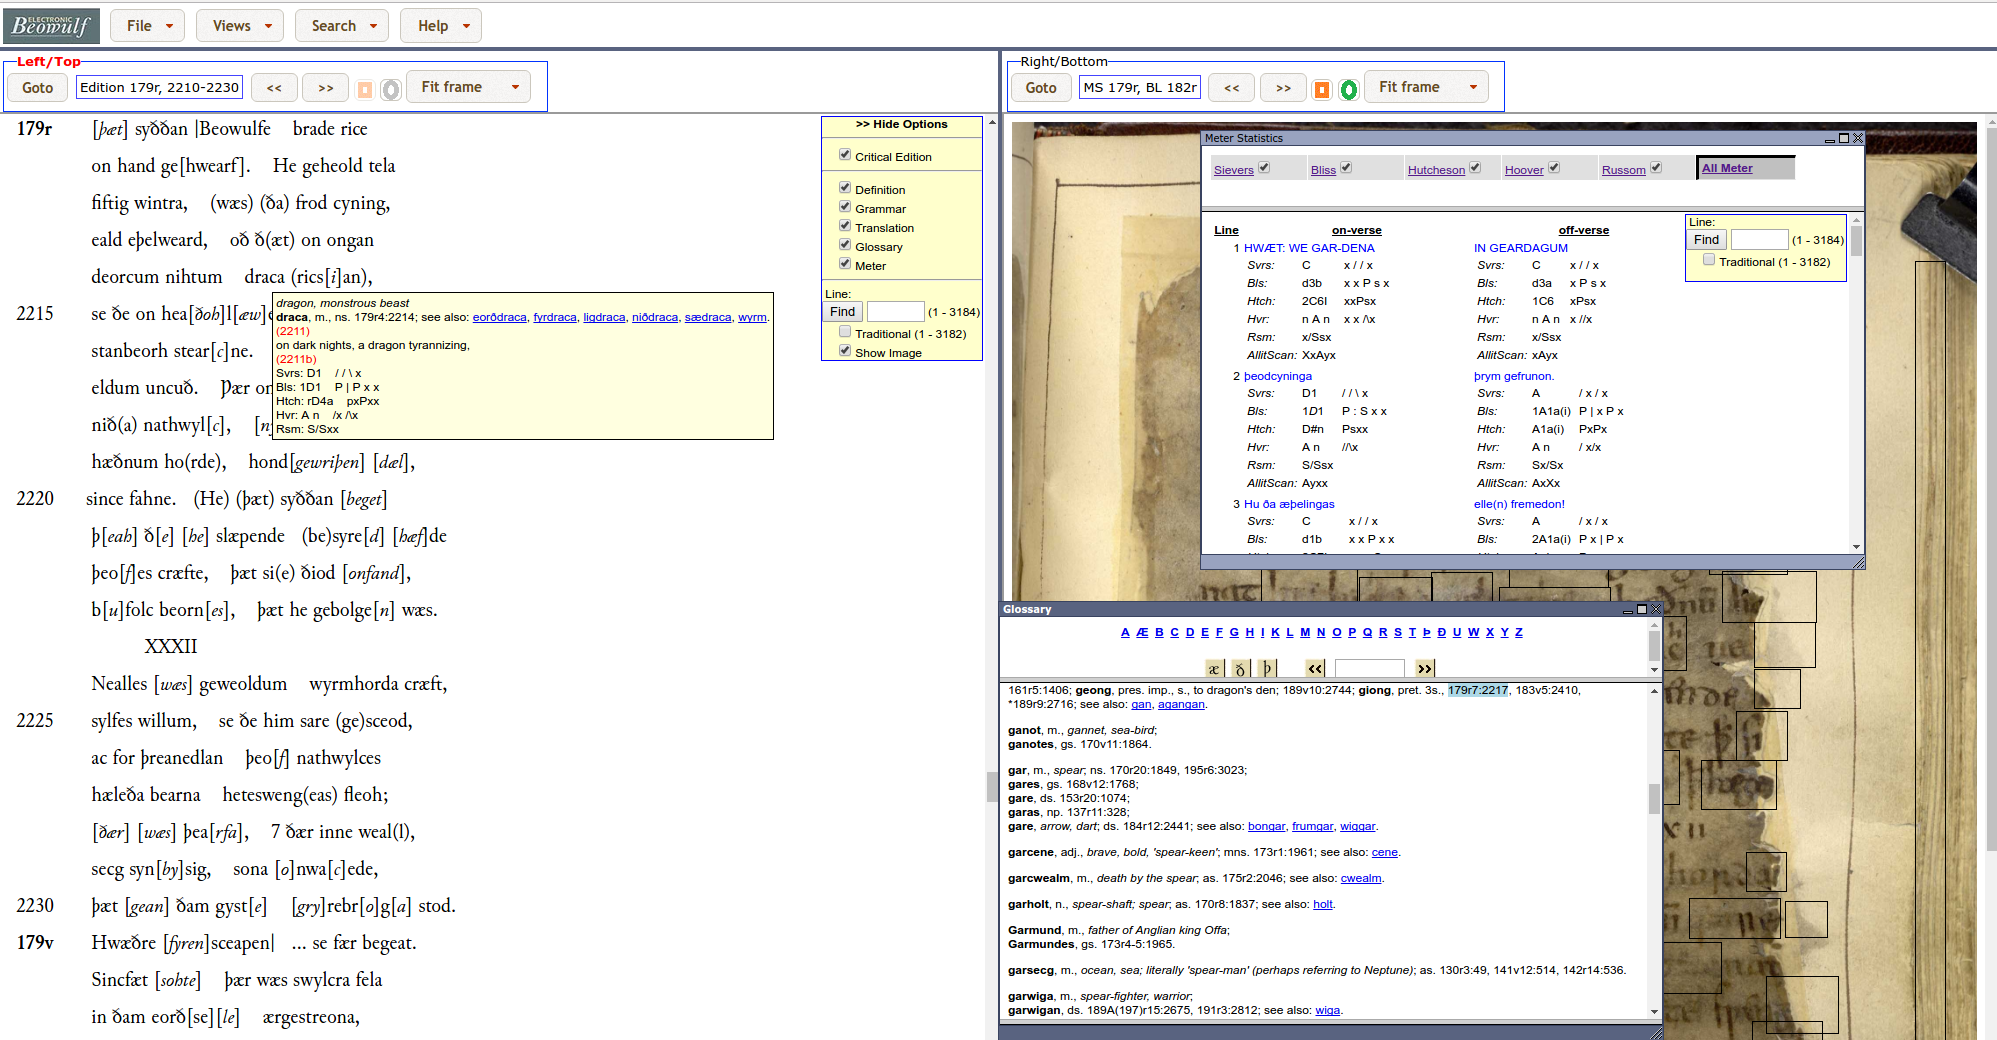 Screenshot showing tool tip with all grammatical, metrical, and lexical information turned on. Glossary and metrical windows are over the right panel and can be resized and moved.